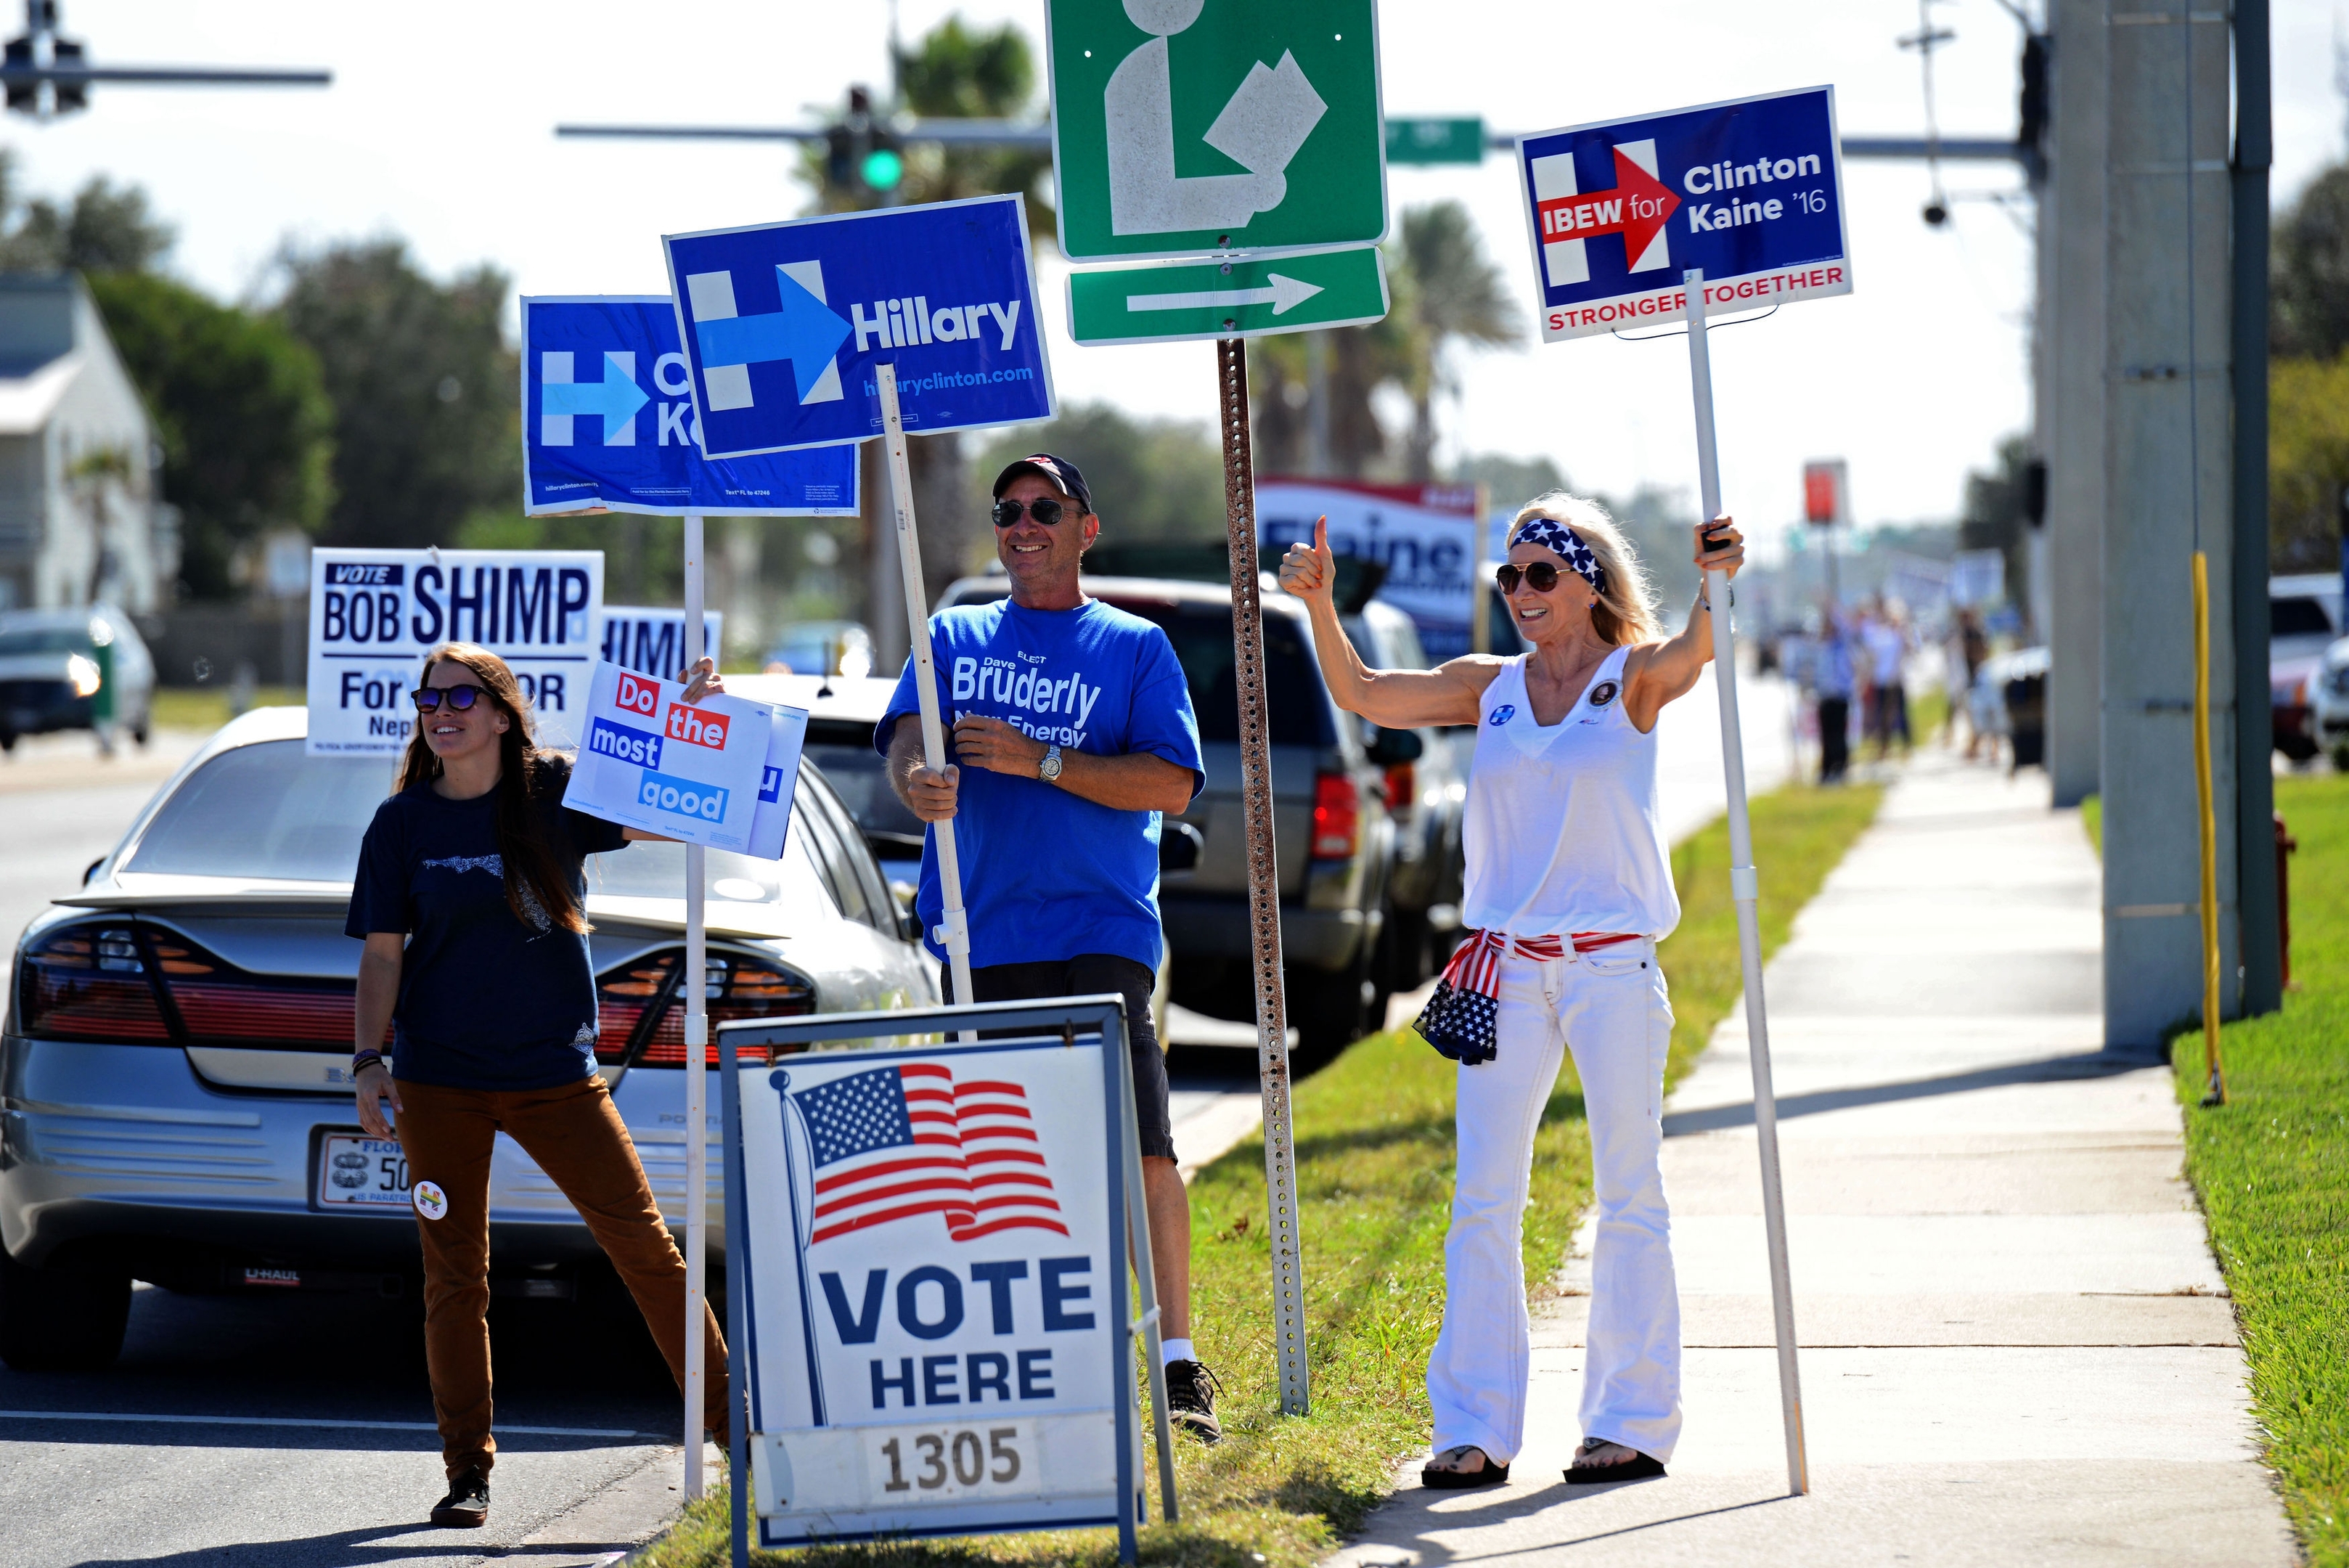 A group of volunteers for Hillary Clinton, from left, Kelley Layton, Steve Haerter, and Joyce DeVane wave to passing traffic on 3rd Street in Neptune Beach, Fla., Tuesday, Nov. 8, 2016, near the polling place at the Beaches Branch of the Jacksonville Public Library.  (Bob Mack/The Florida Times-Union via AP)